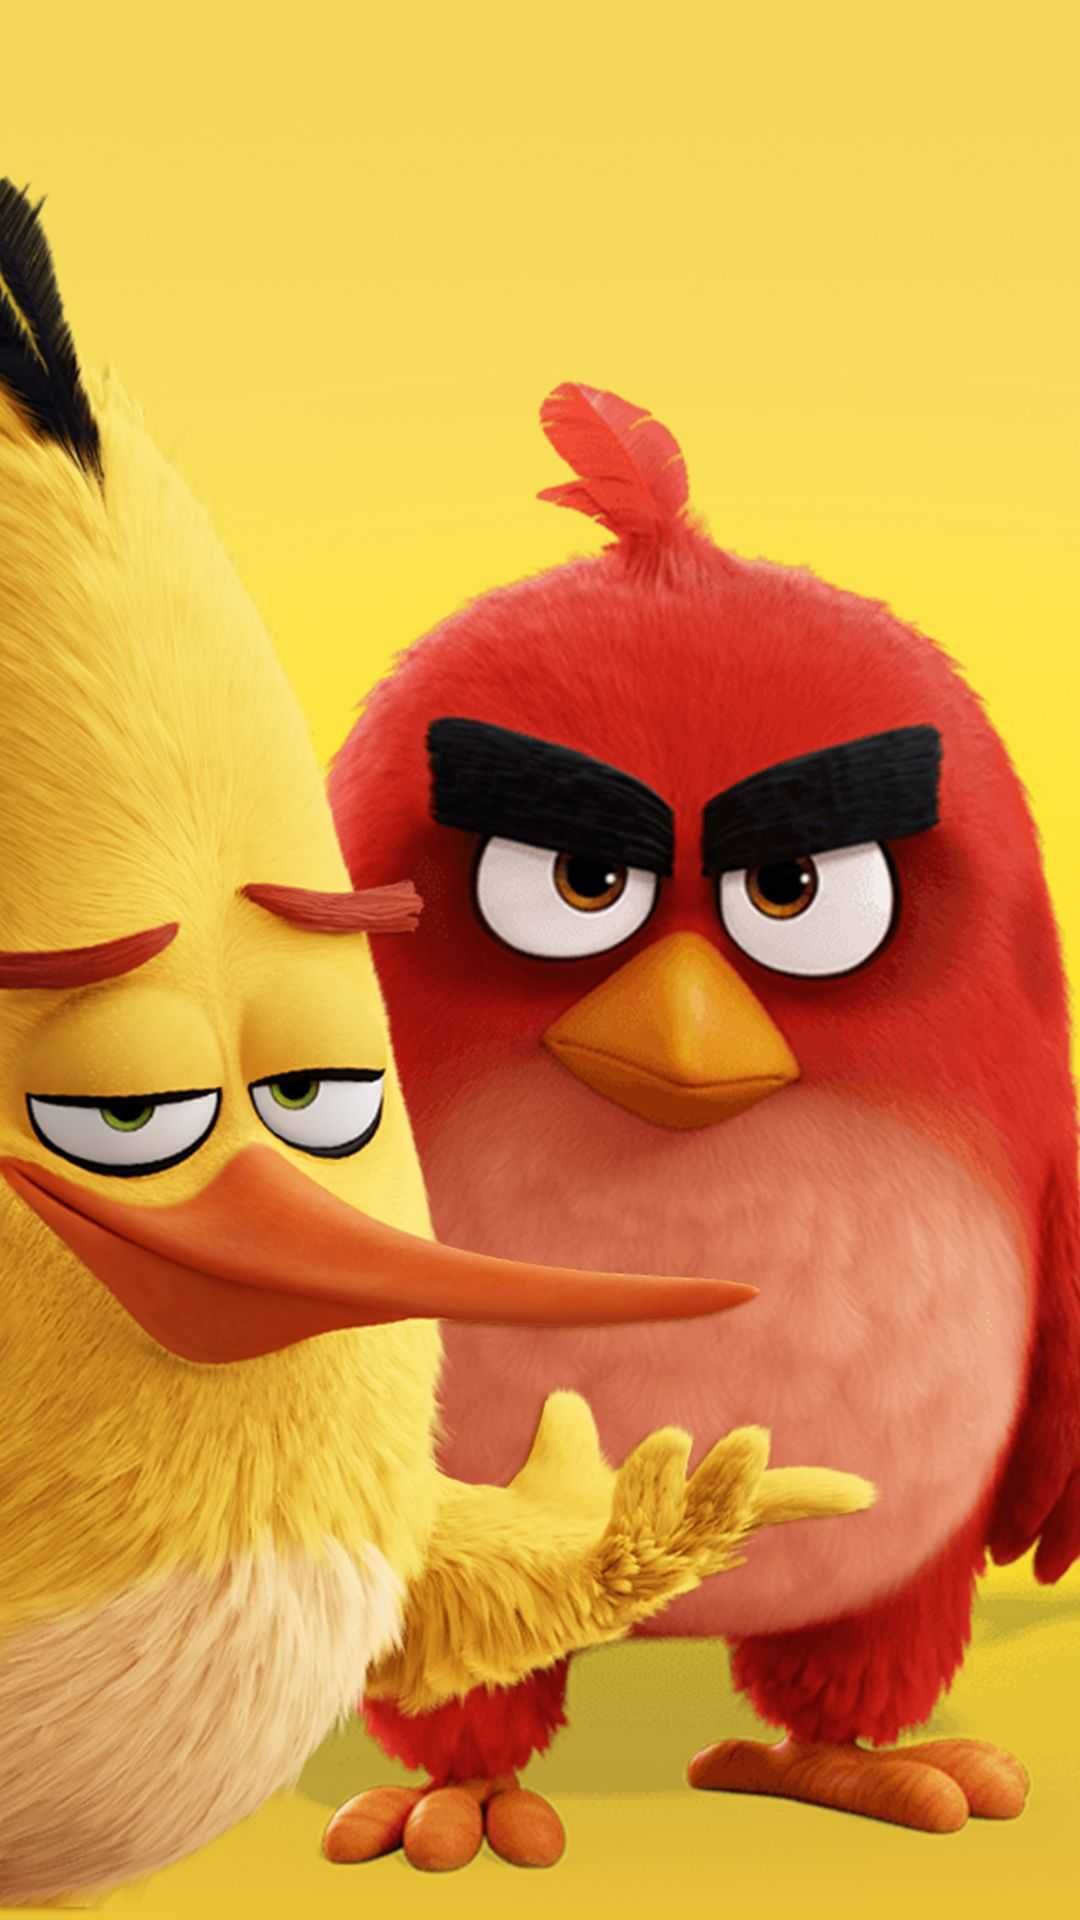 Angry Birds Wallpaper Discover more Angry Birds, Casual Puzzle, Fly, Maemo, Rovio Entertainment wallpap. Angry birds characters, Cartoon wallpaper, Bird wallpaper